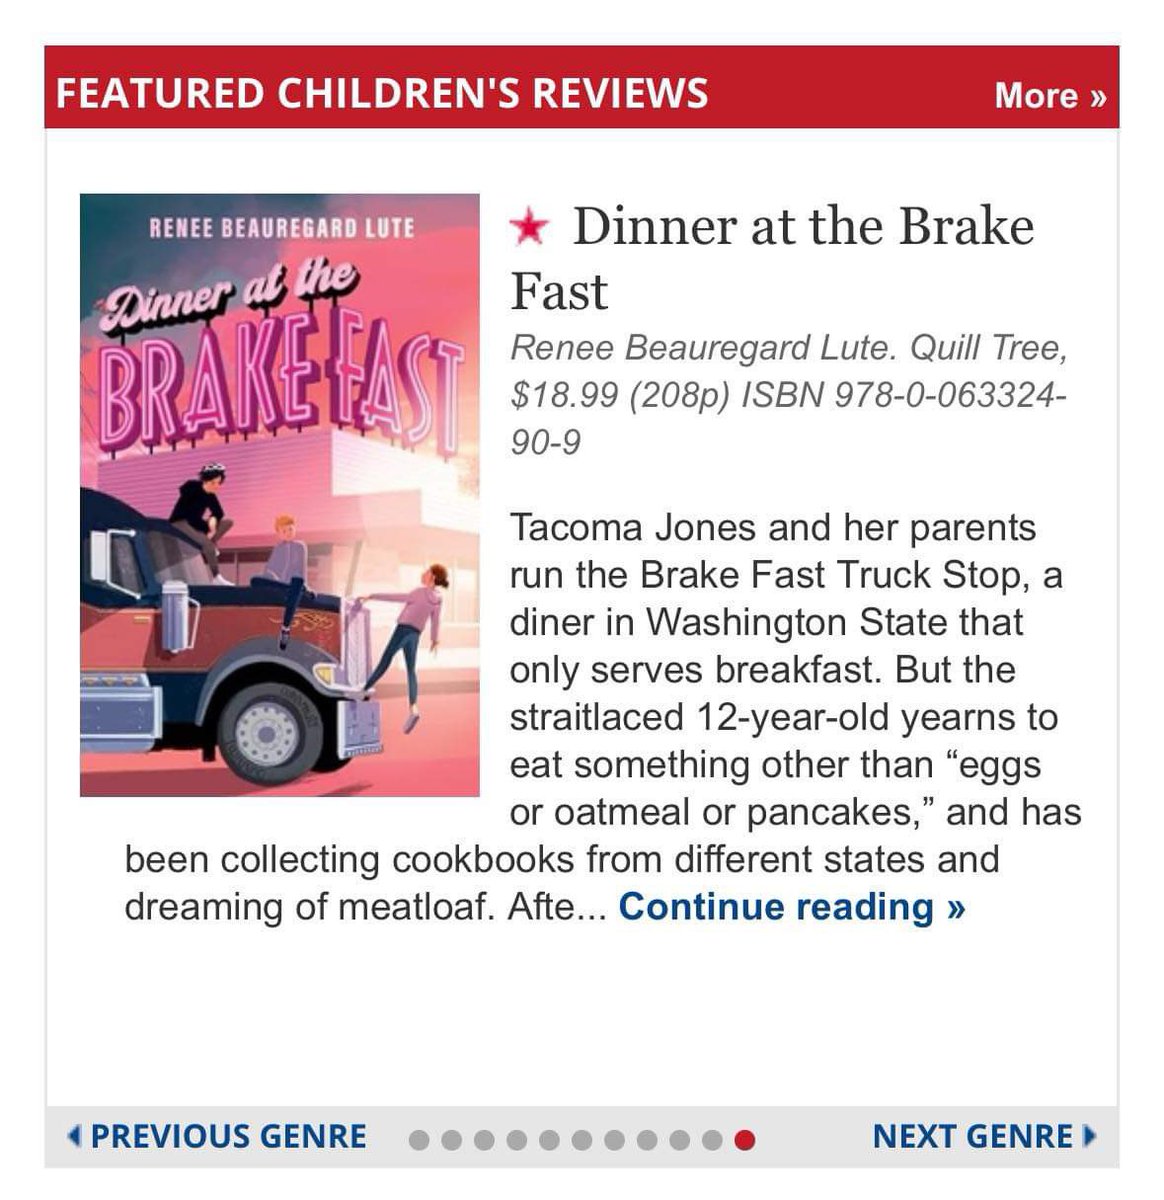 DINNER AT THE BRAKE FAST got a starred review in Publishers Weekly, and I am absolutely over the moon! (It’s a gorgeous review, too. Lots of happy tears over here.) ⭐️ It’s out June 25th, and I truly can’t wait for you to read it. publishersweekly.com/9780063324909